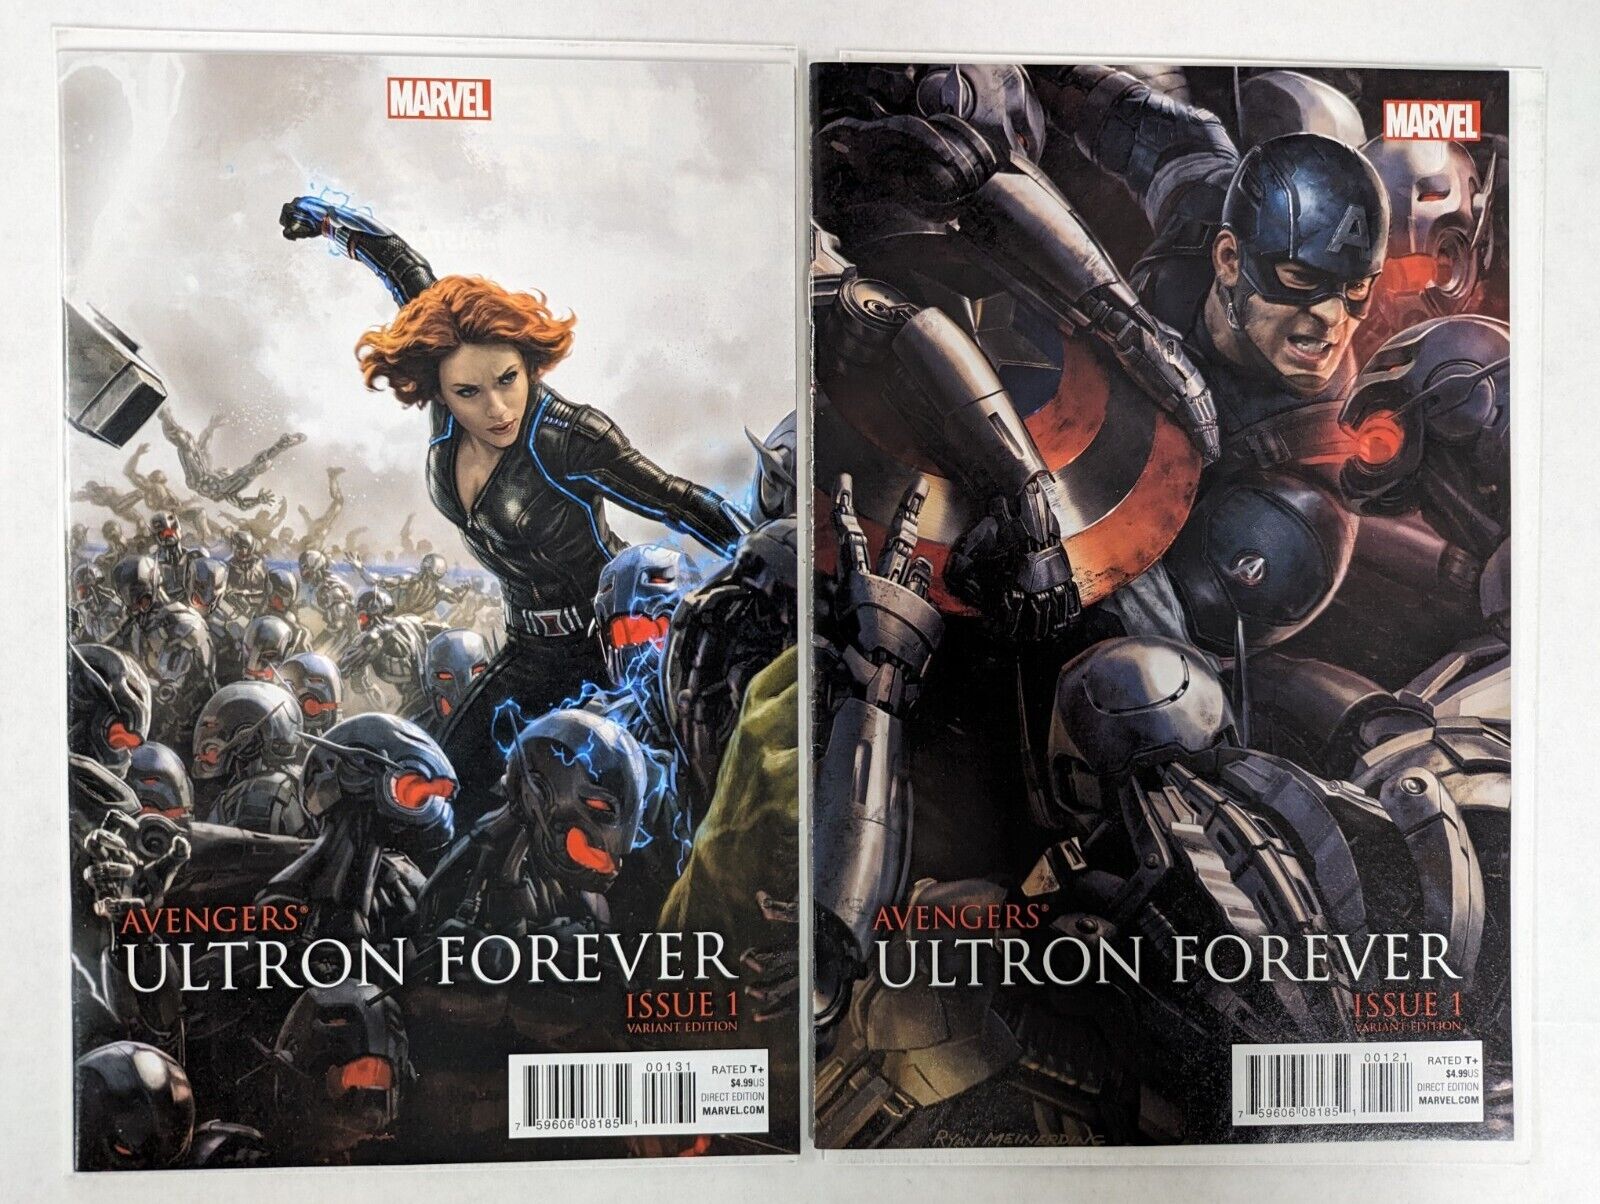 AVENGERS: ULTRON FOREVER #1 Black Widow And Captain America  Variant 2 Books